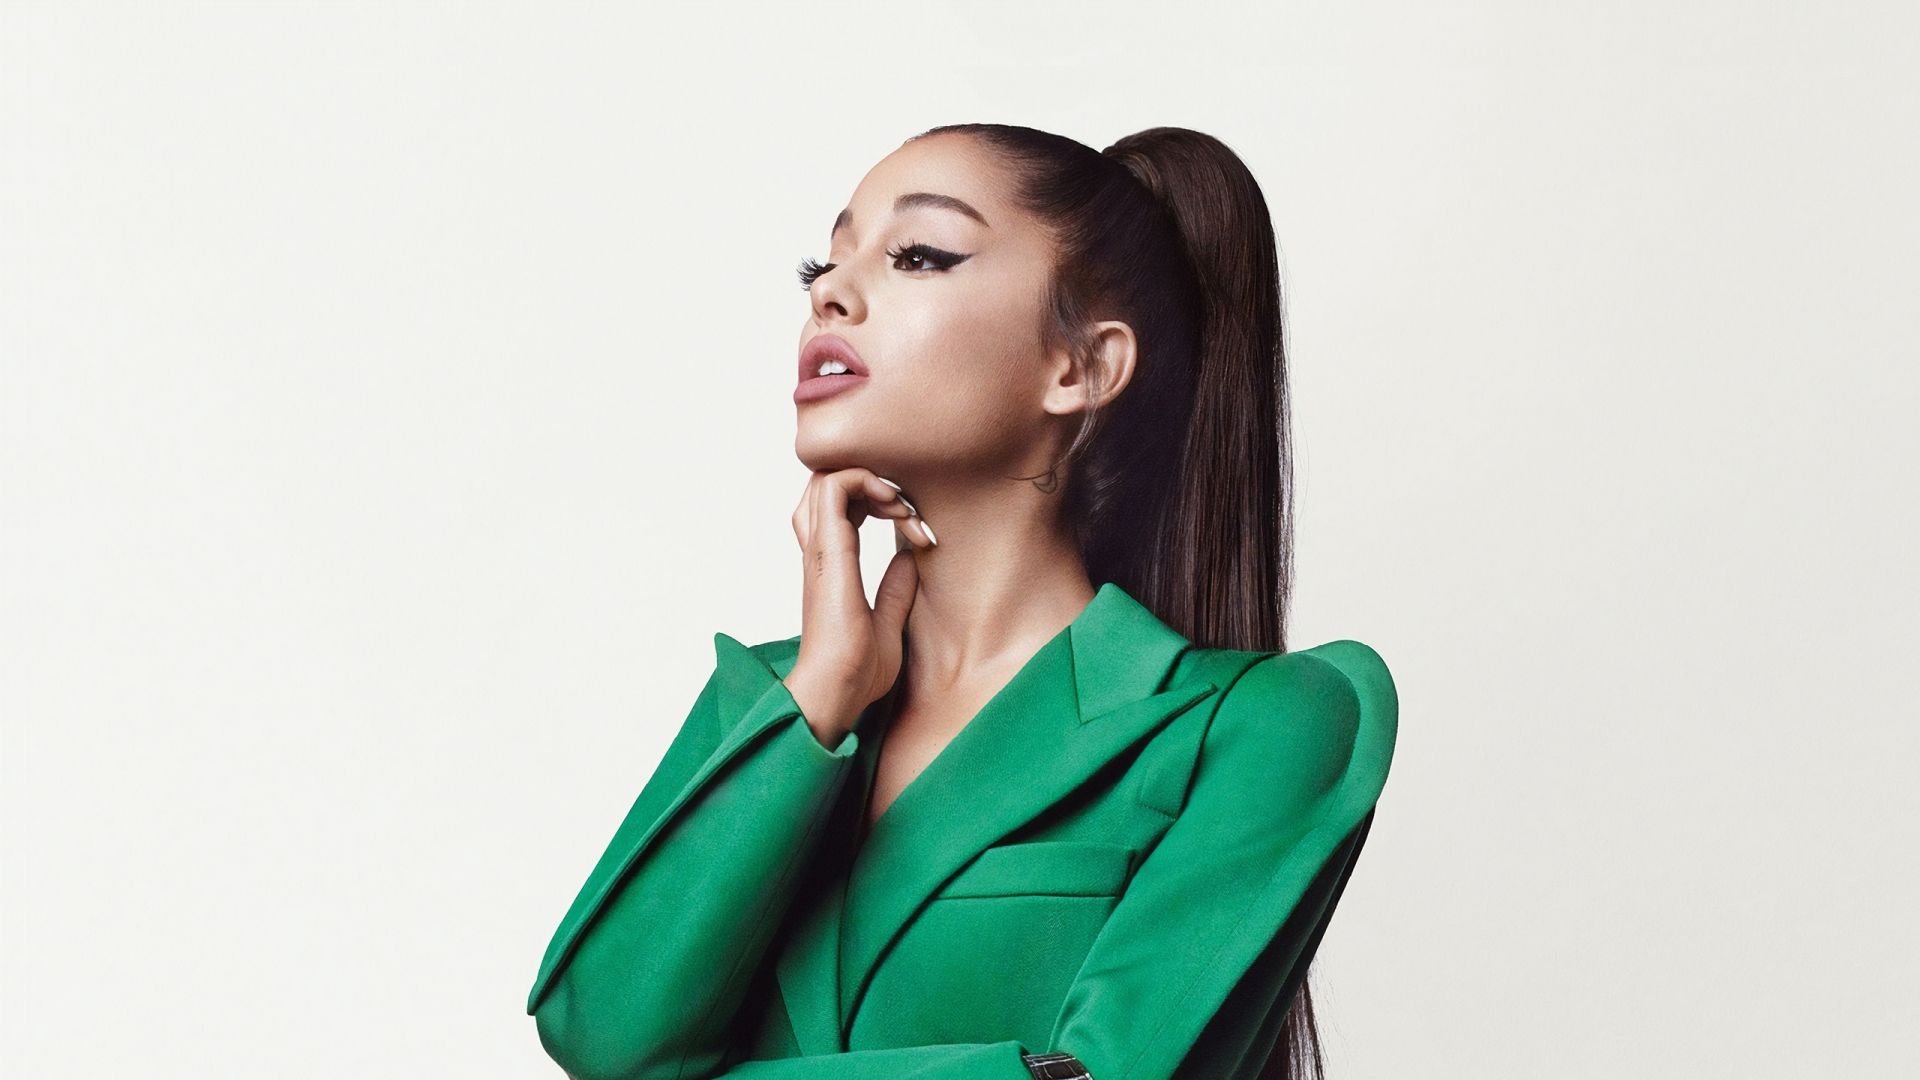 Ariana grande, givenchy campaign, 2019 wallpaper, HD image, picture, background, 65531c